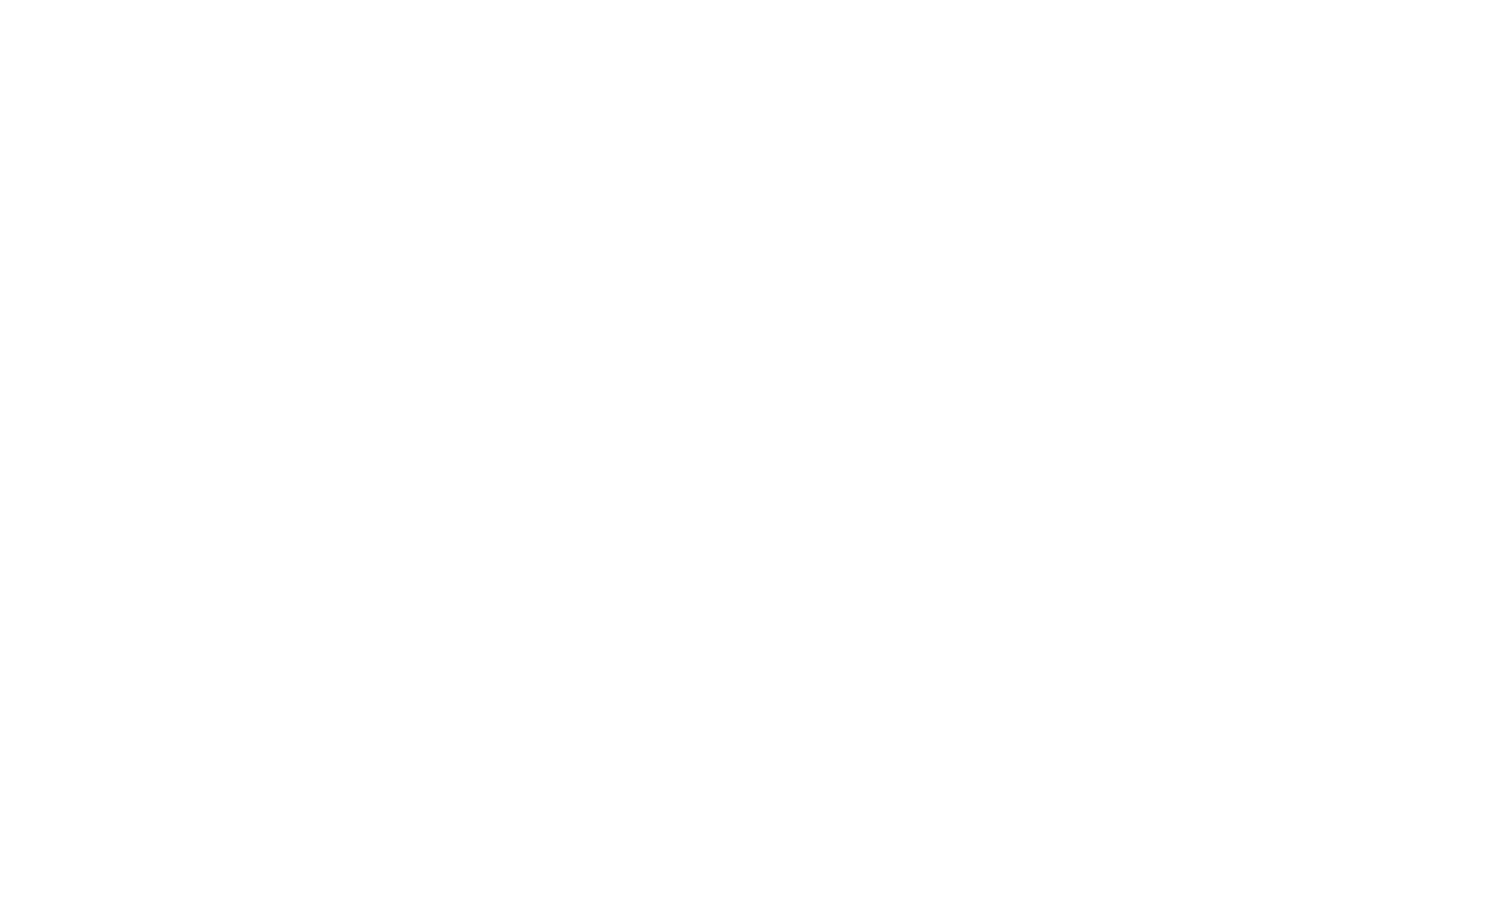 On The Line